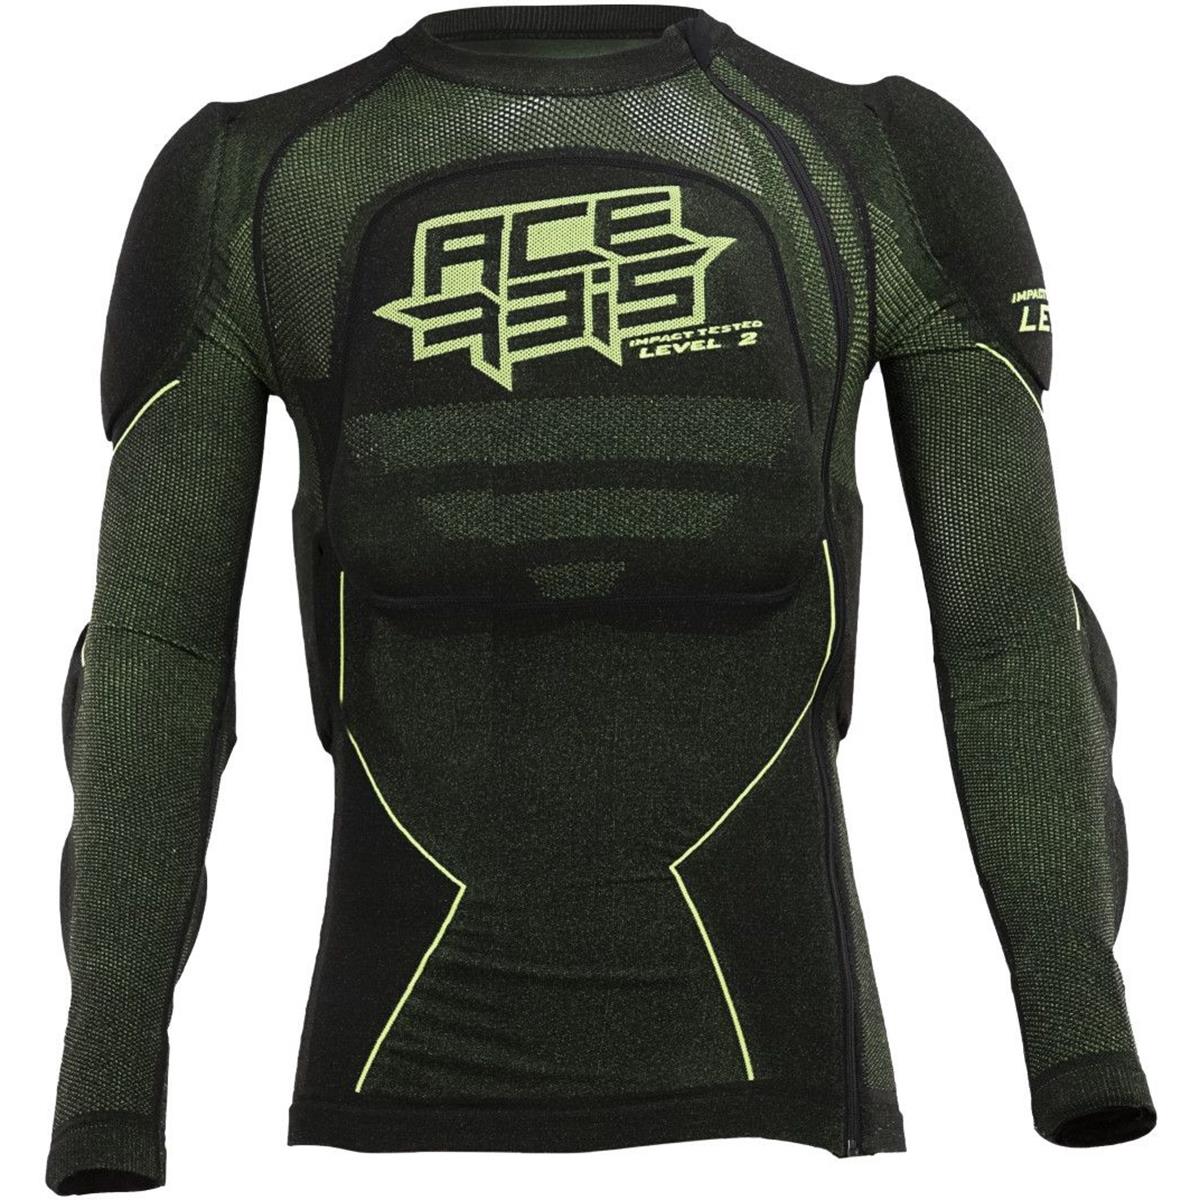 Acerbis Protector Jacket X-Fit Future Level 2 Black/Fluo Yellow